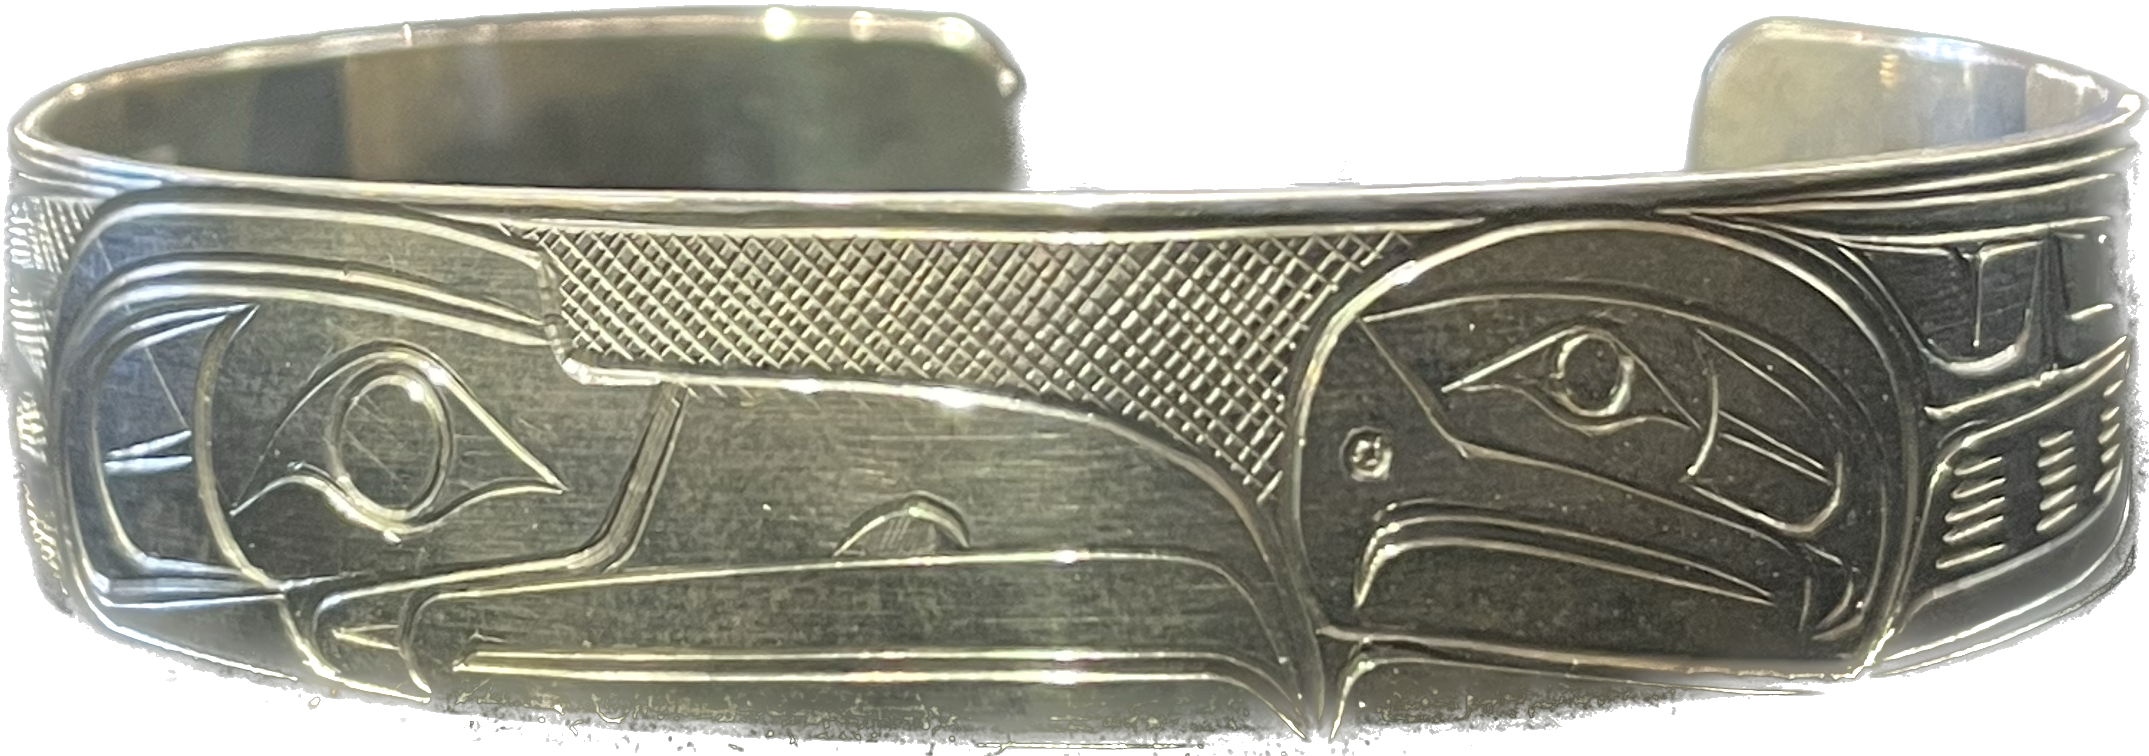 Eagle and Whale - silver bracelet